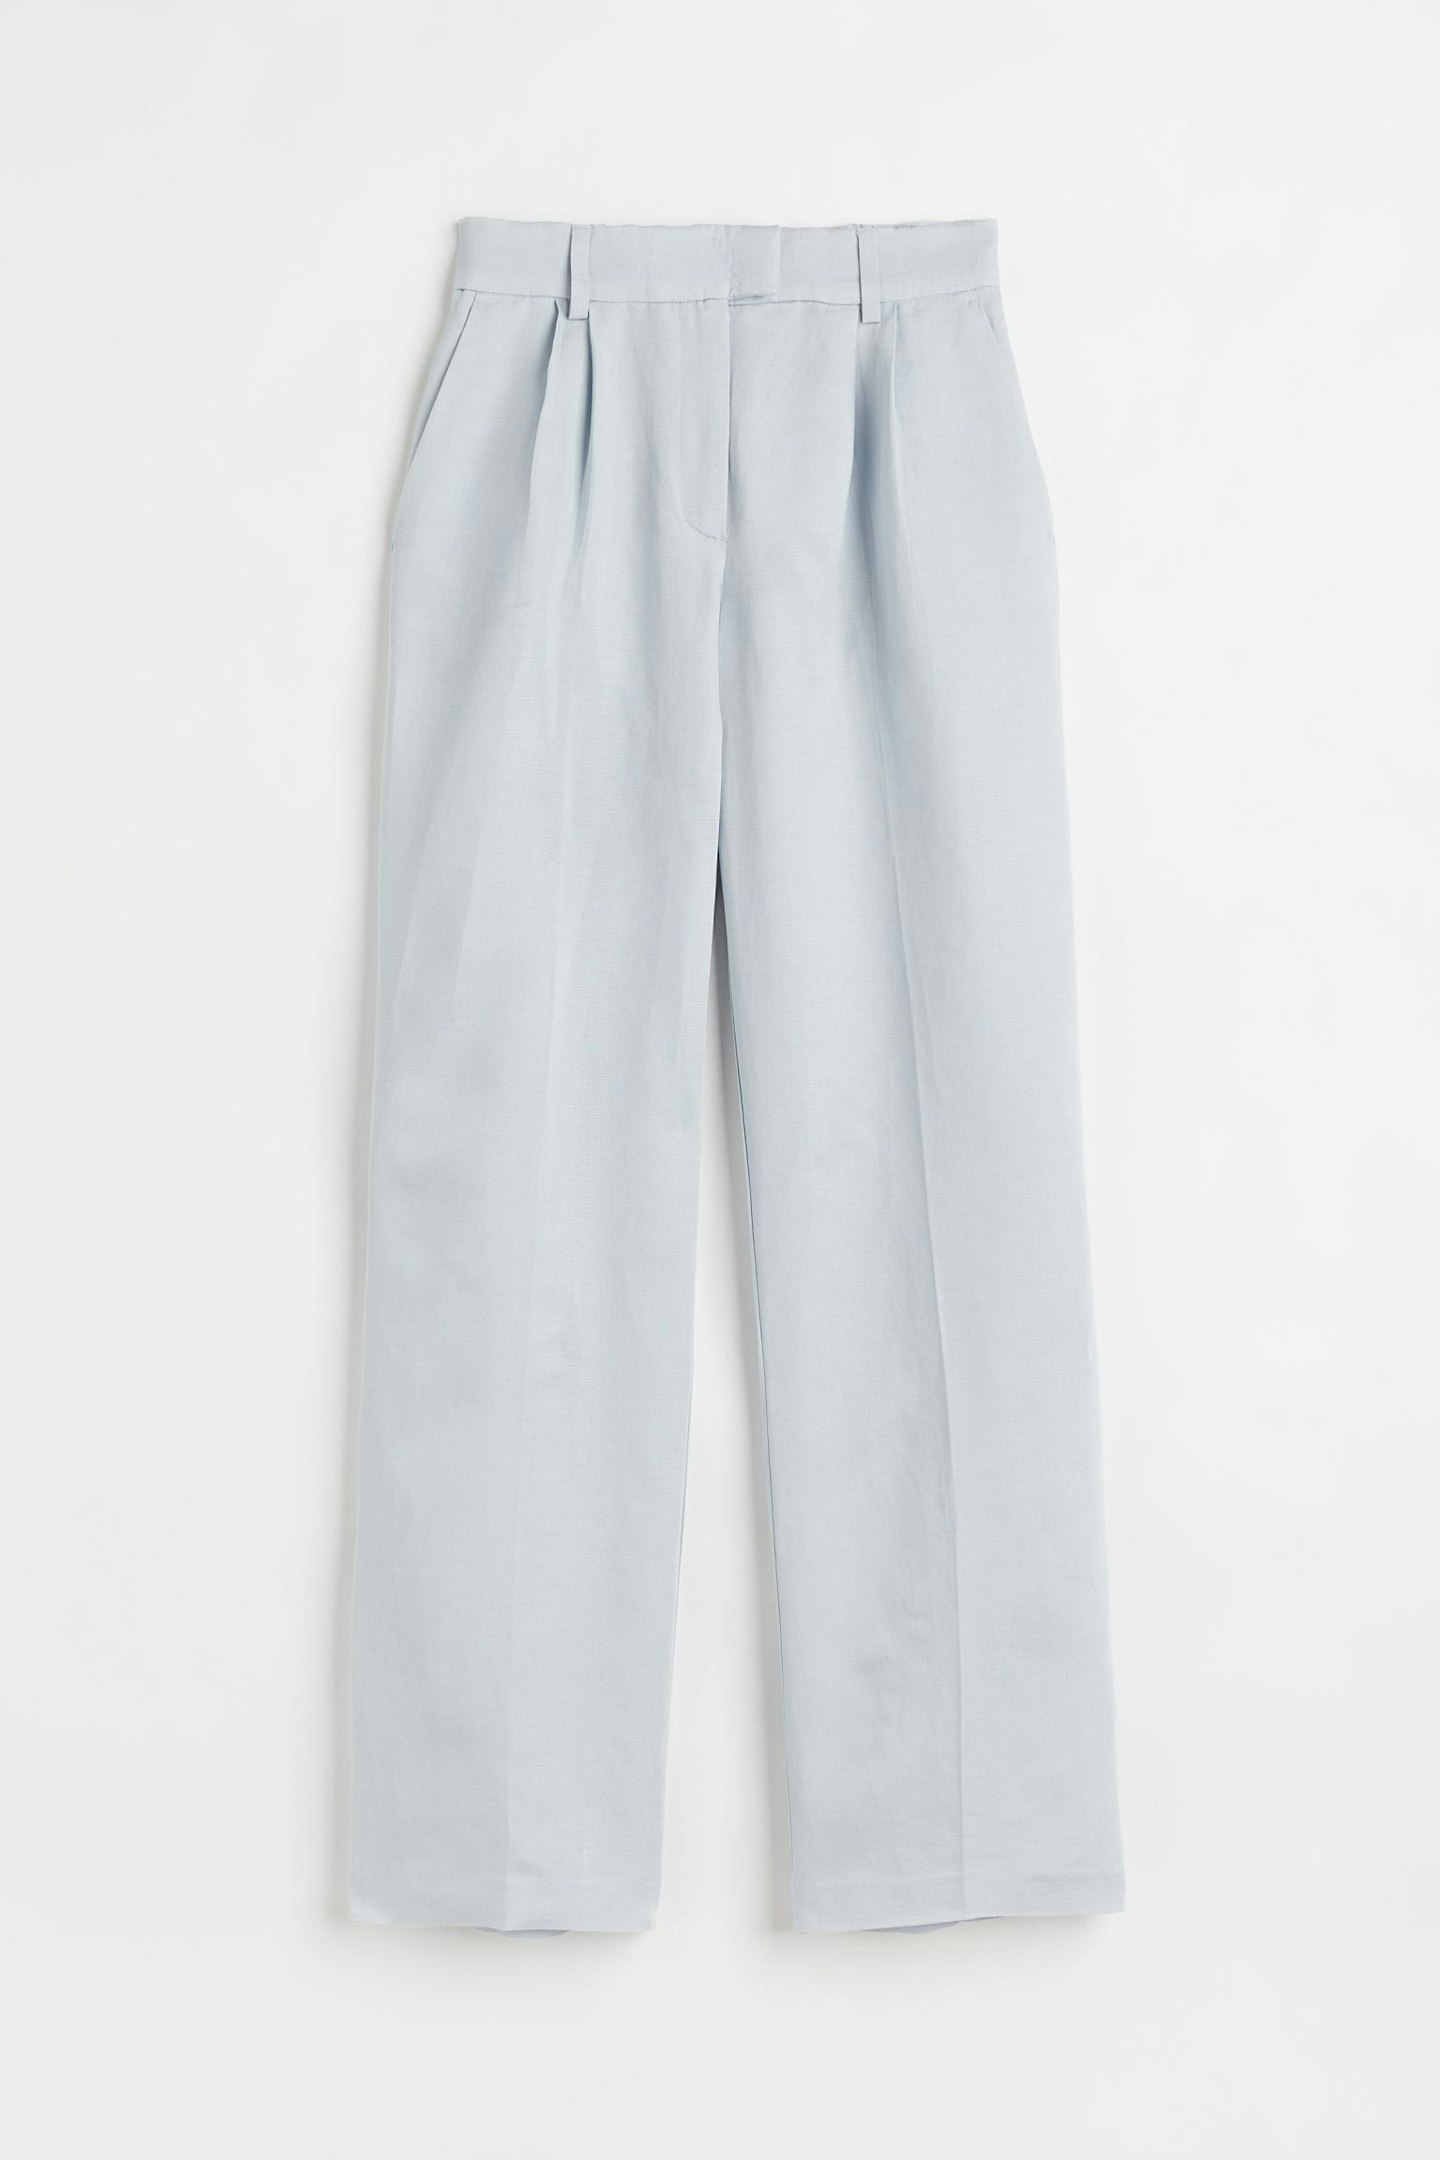 best trousers for summer   H&M, Tailored Light Blue-Grey Tailored Trousers, £24.99